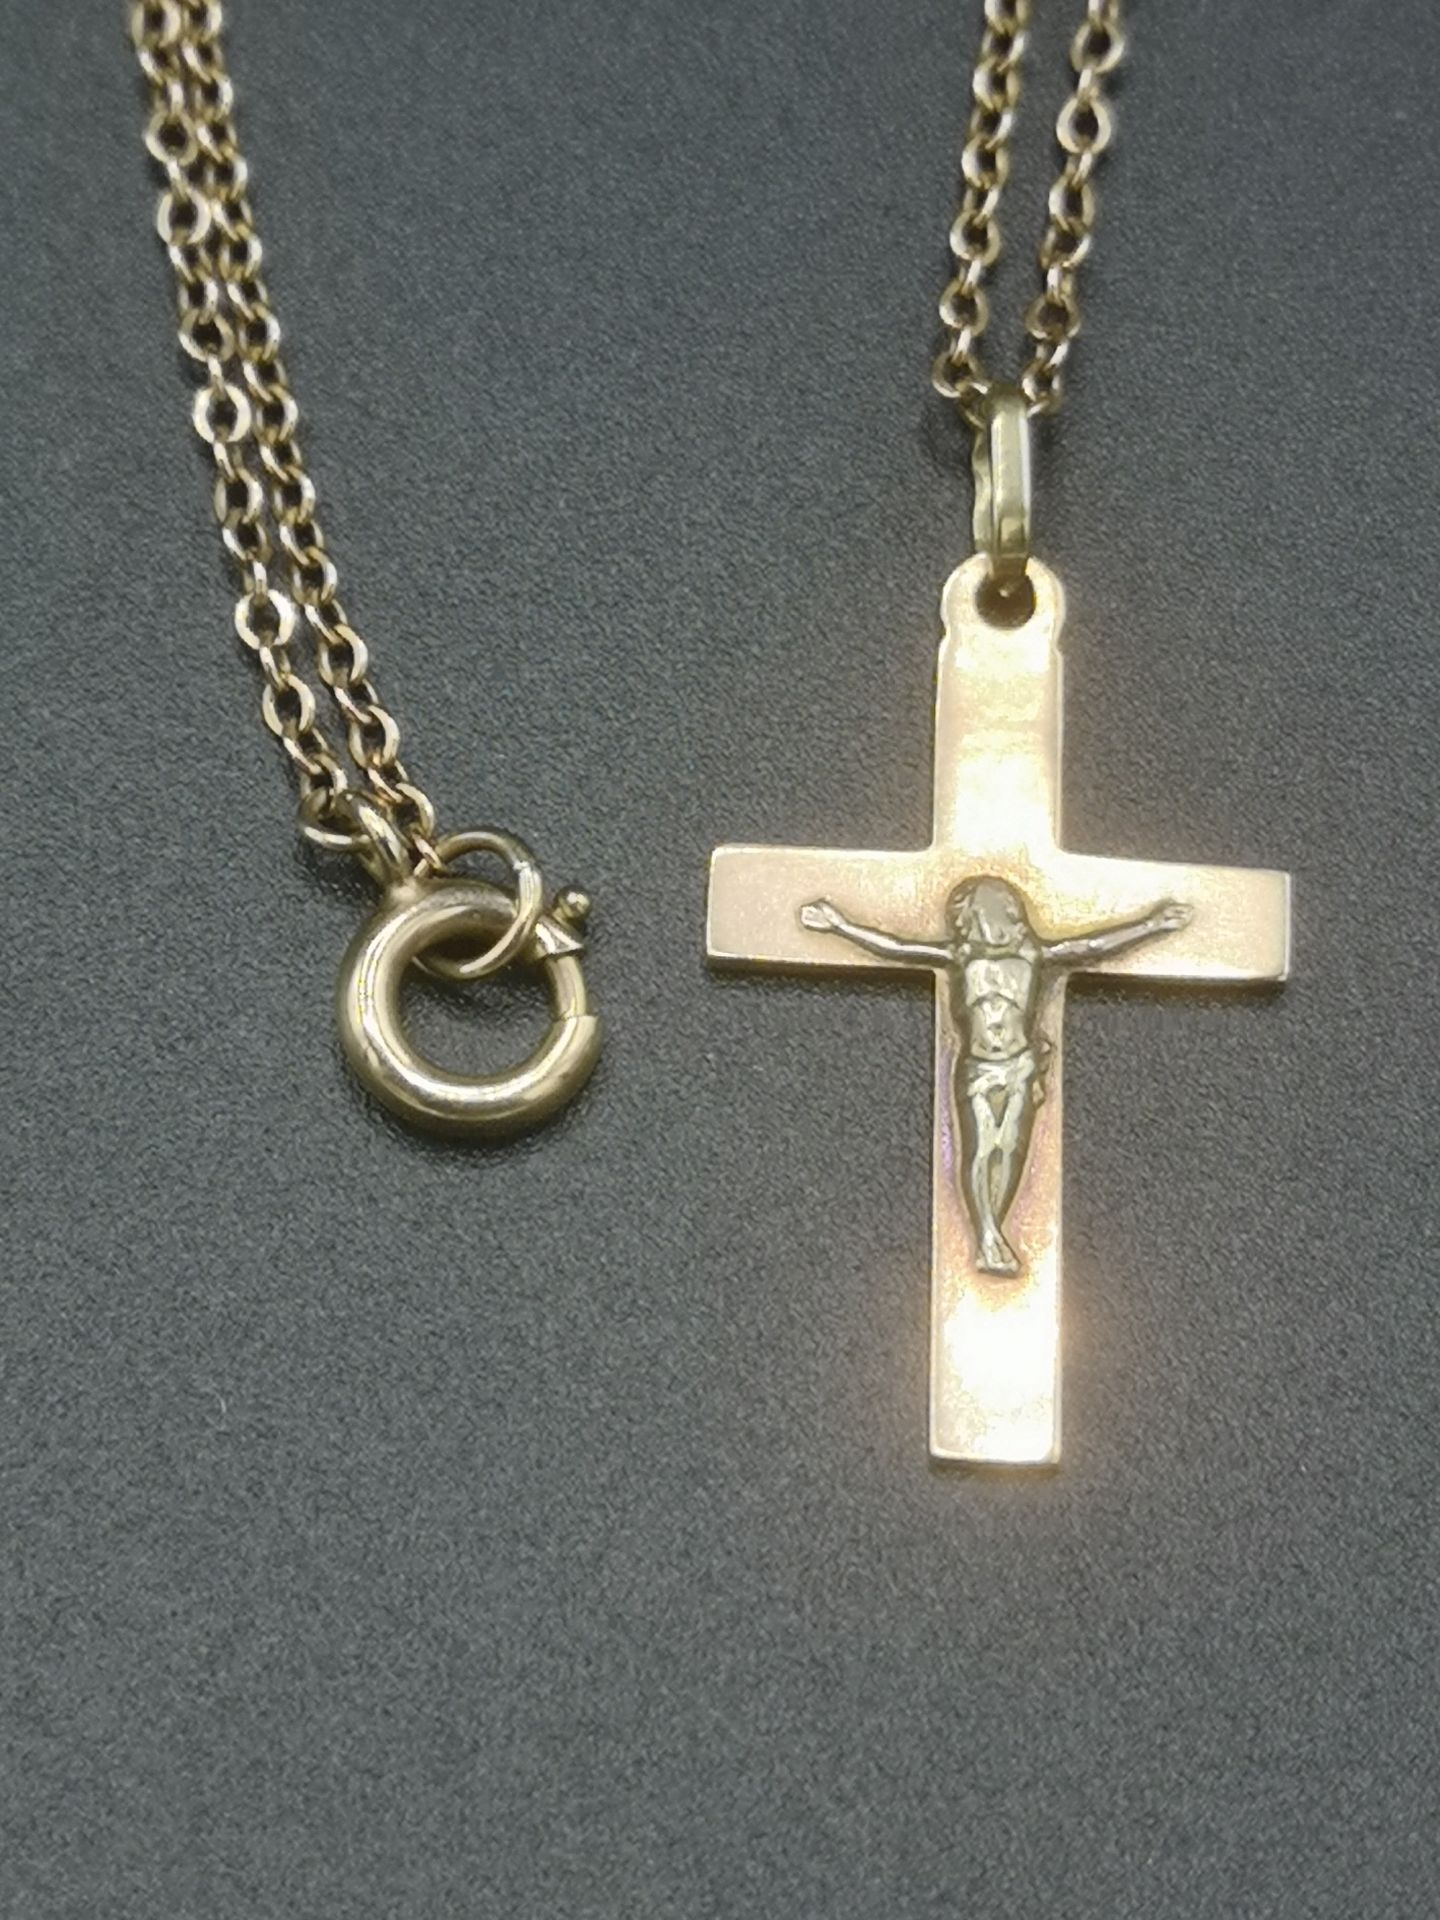 9ct gold necklace with crucifix pendant - Image 3 of 4